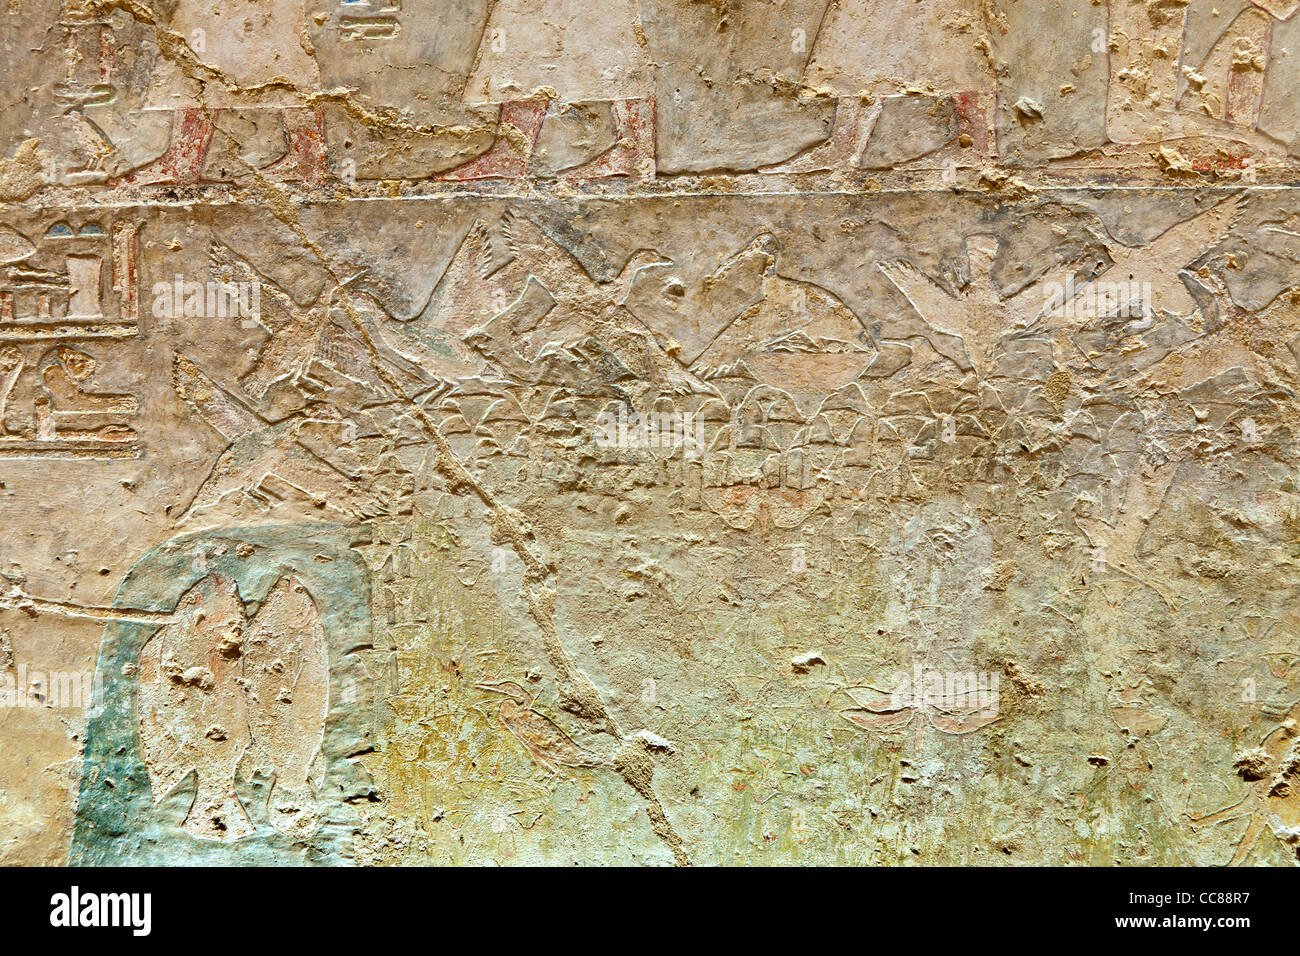 Reliefs in the Middle Kingdom tomb of Senbi Son of Ykh Hotep at Meir , North West of Asyut in Middle Egypt Stock Photo